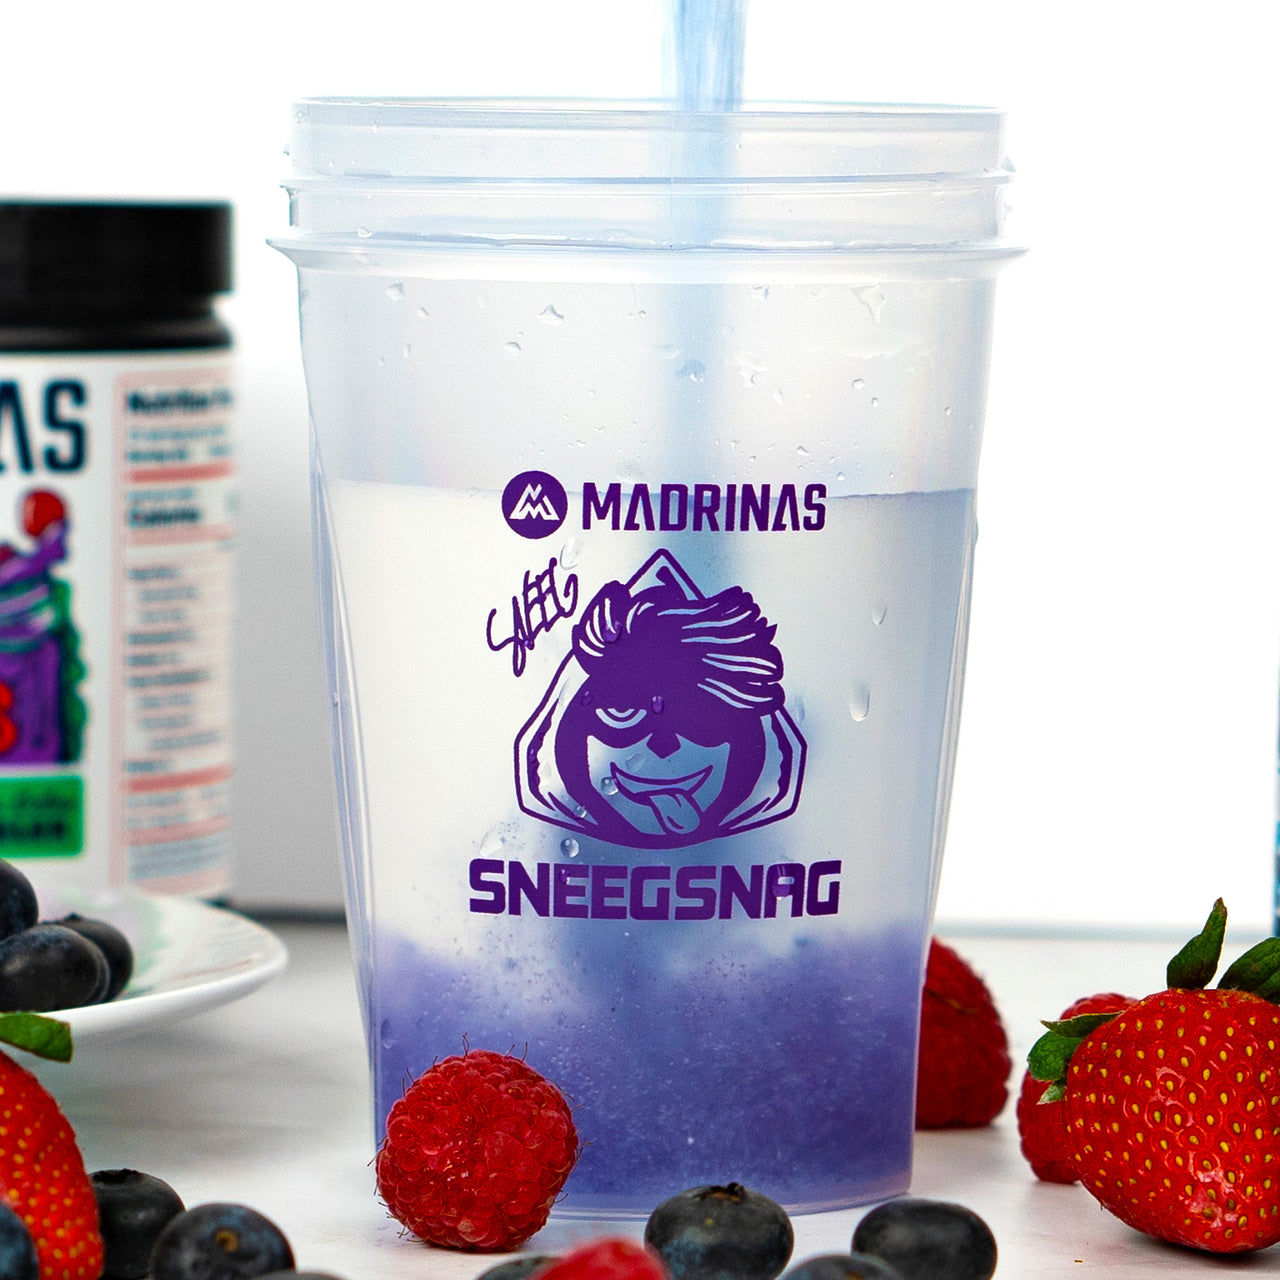 Madrinas x Sea of Thieves  Sea of Thieves Shaker Cup